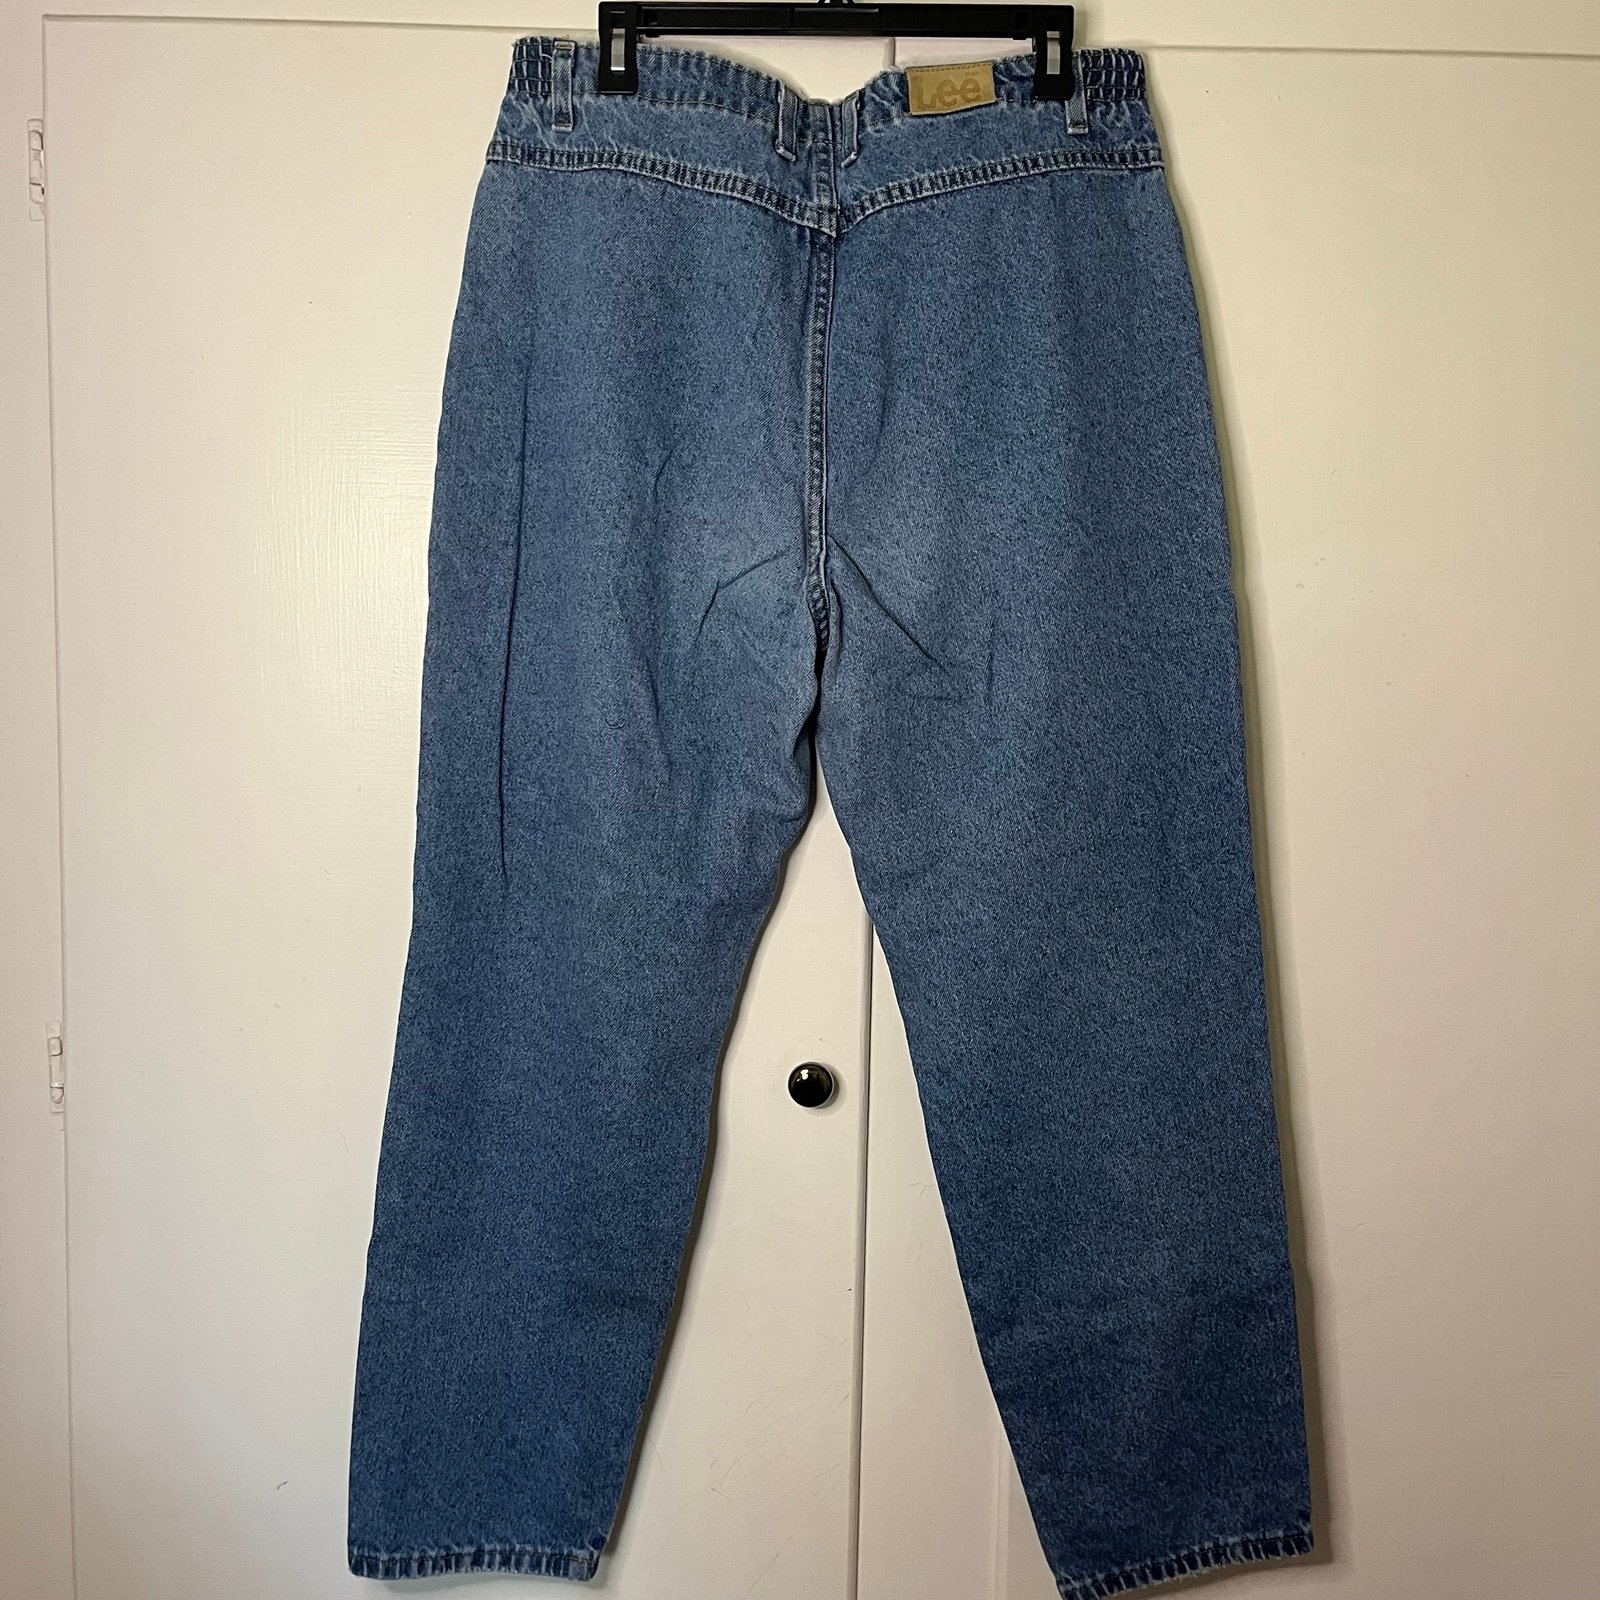 Exclusive Vintage 90s Lee Relaxed Fit Mom Jeans Medium Wash kg3IWCtgR Online Exclusive